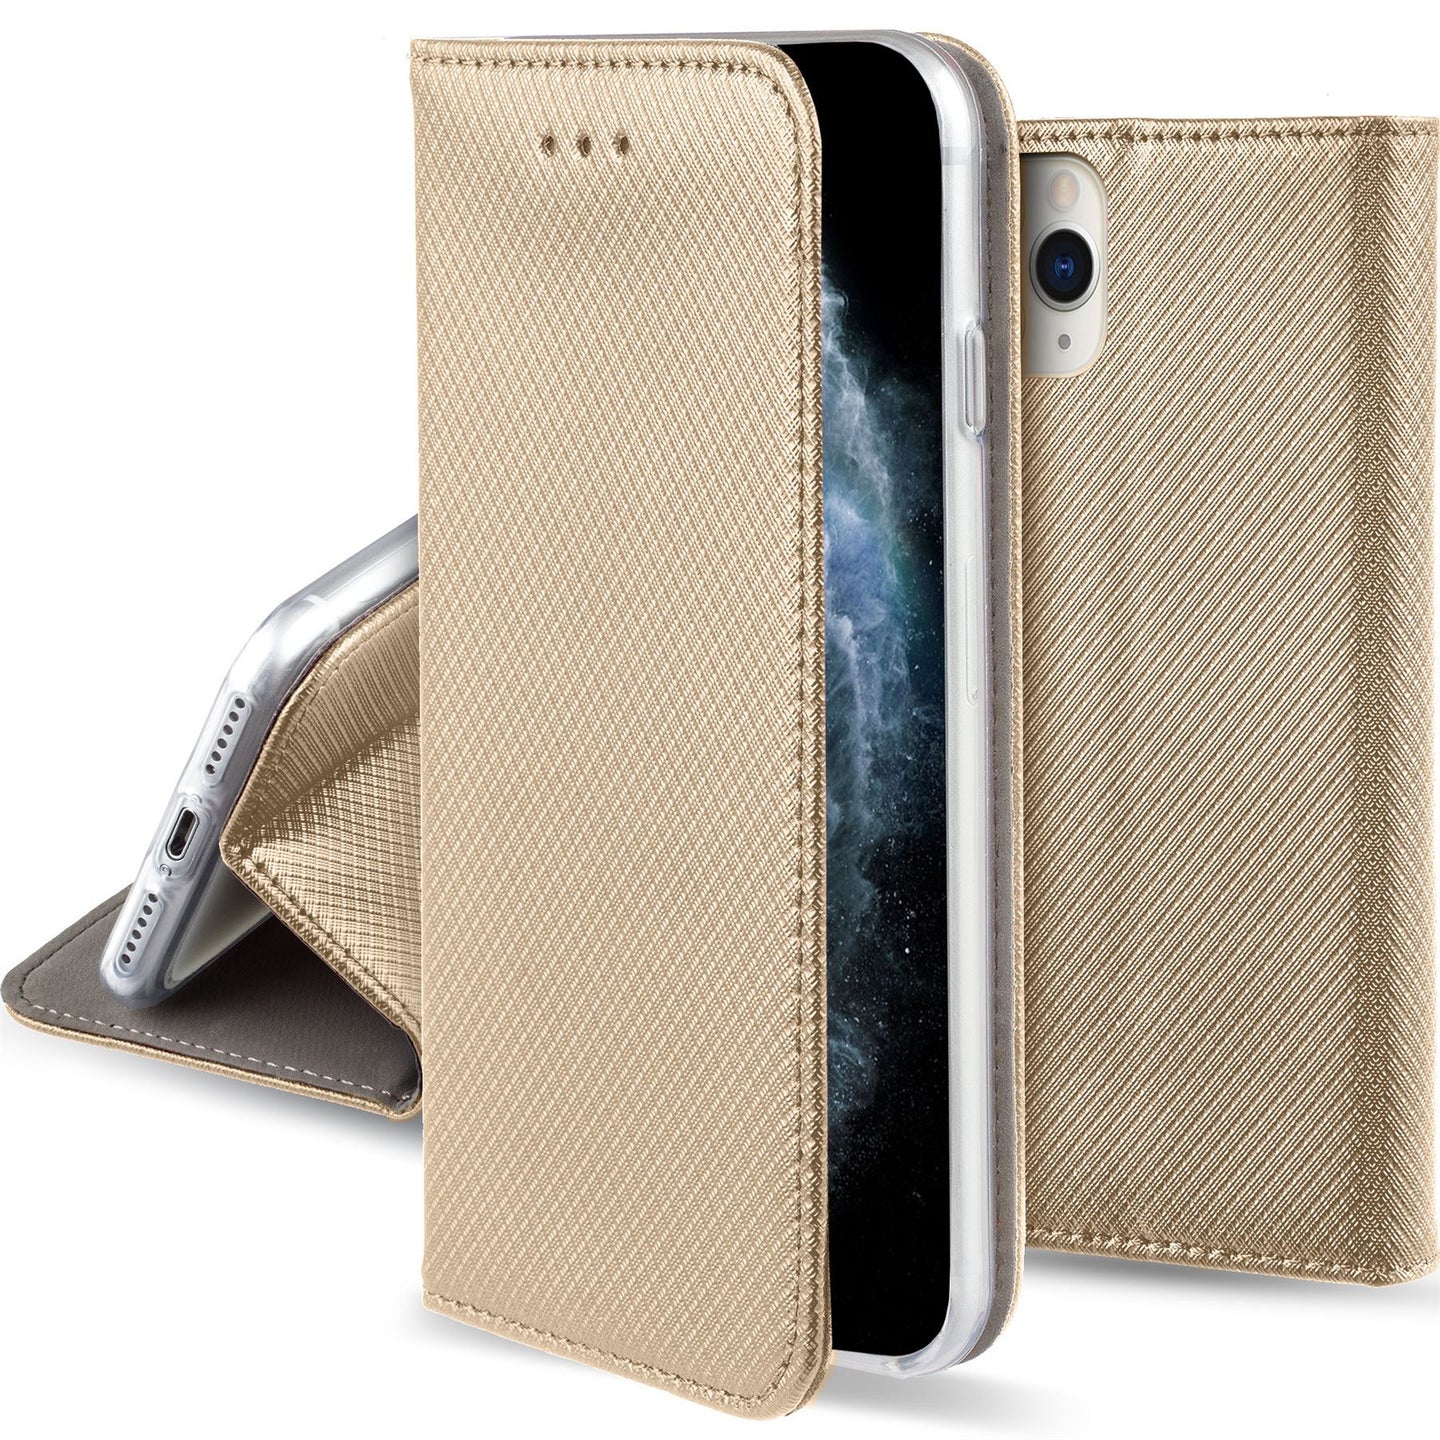 Moozy Case Flip Cover for iPhone 11 Pro, Gold - Smart Magnetic Flip Case with Card Holder and Stand